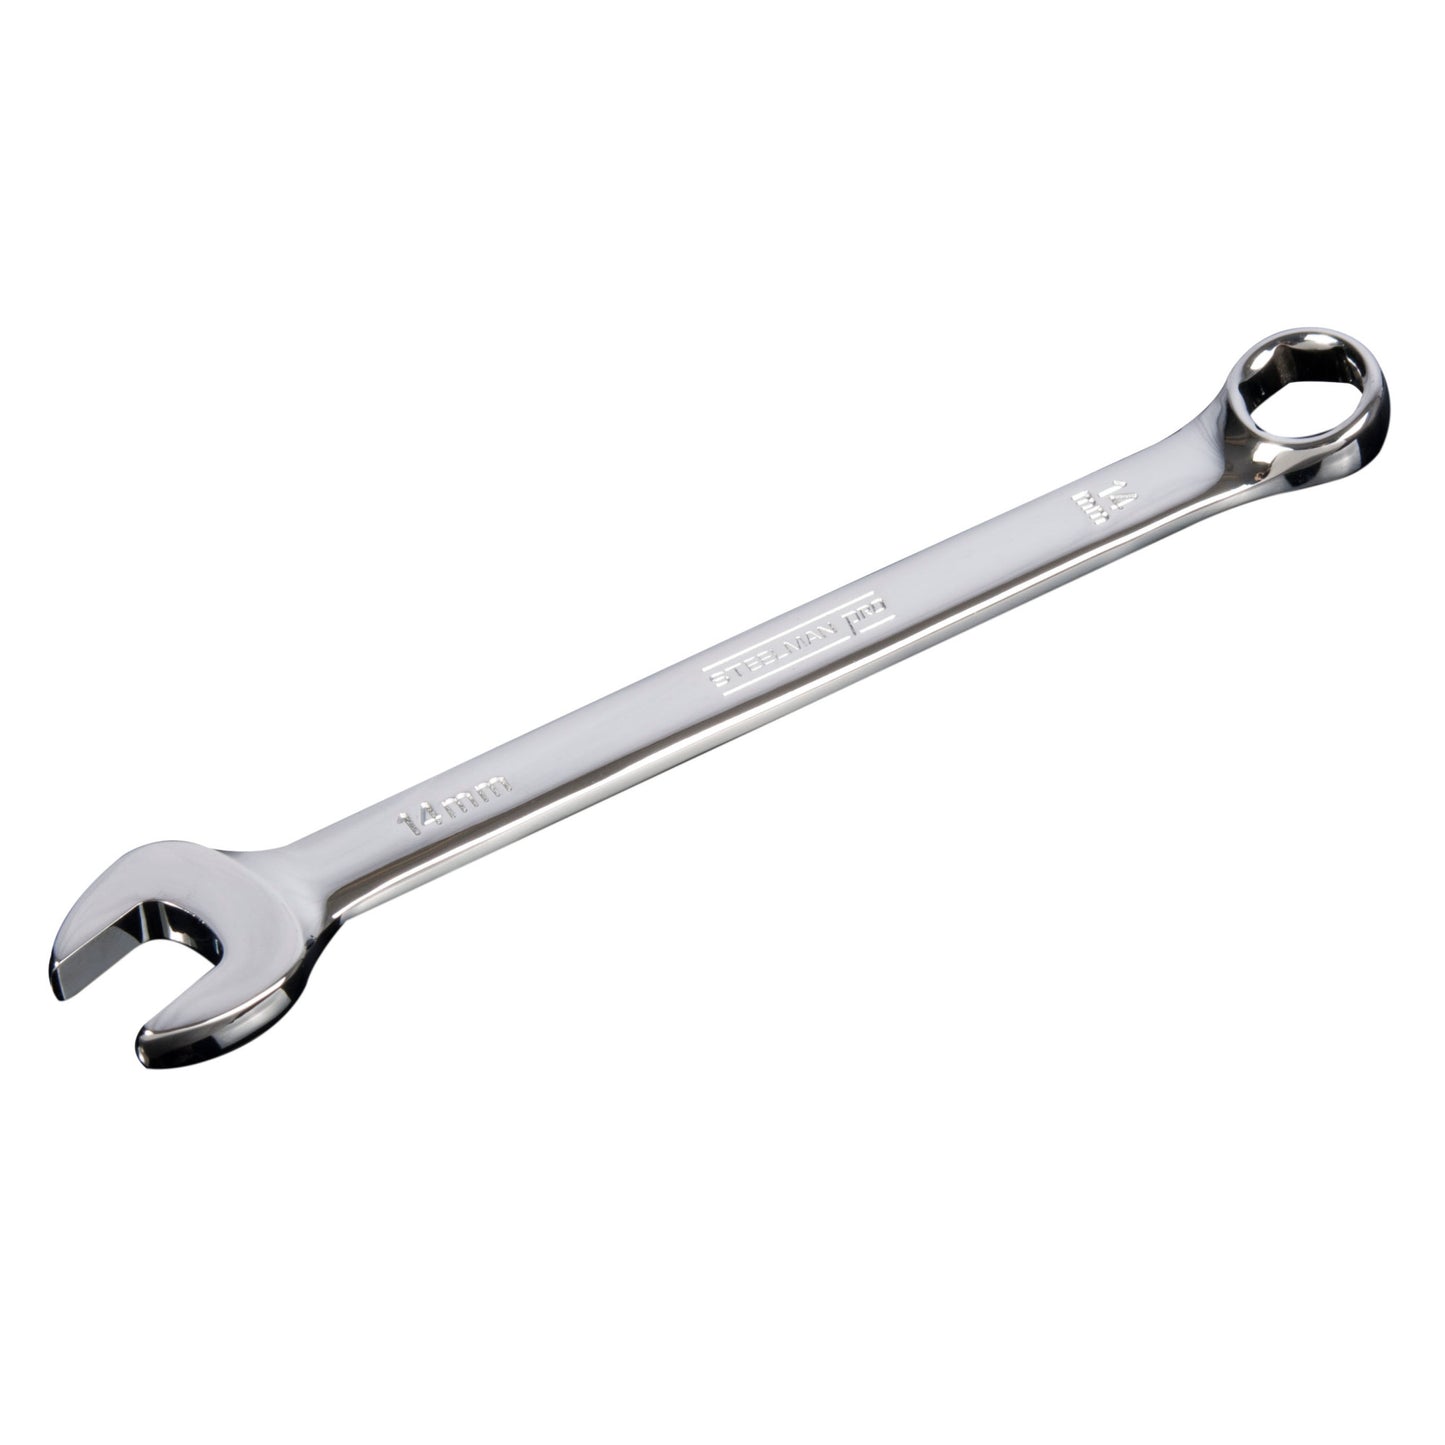 14mm Combination Wrench with 6-Point Box End